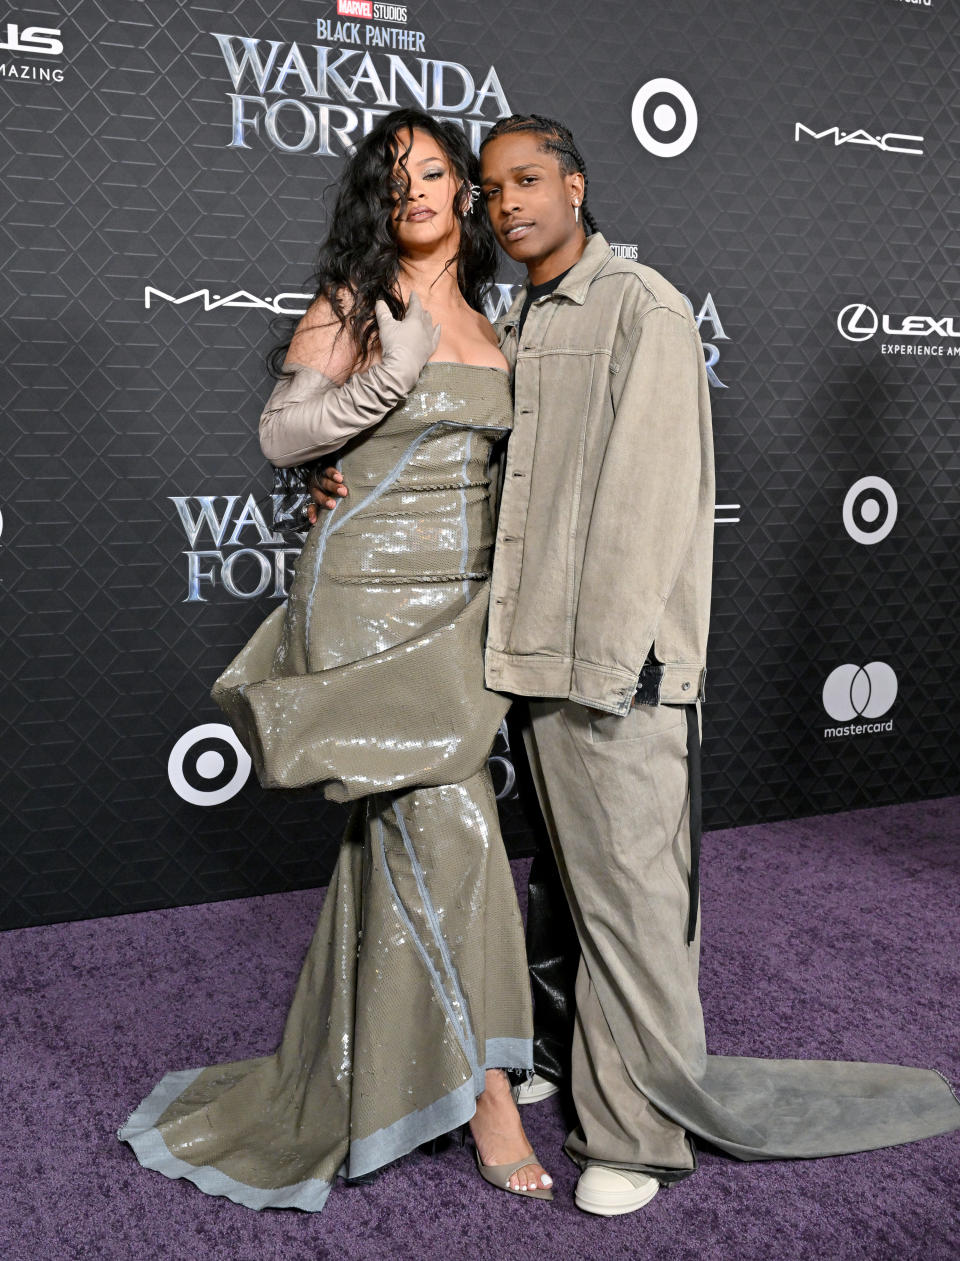 Rihanna wearing a strapless sequined gown and matching opera gloves.&nbsp;A$AP Rocky wearing oversized pants and a matching jacket and t-shirt